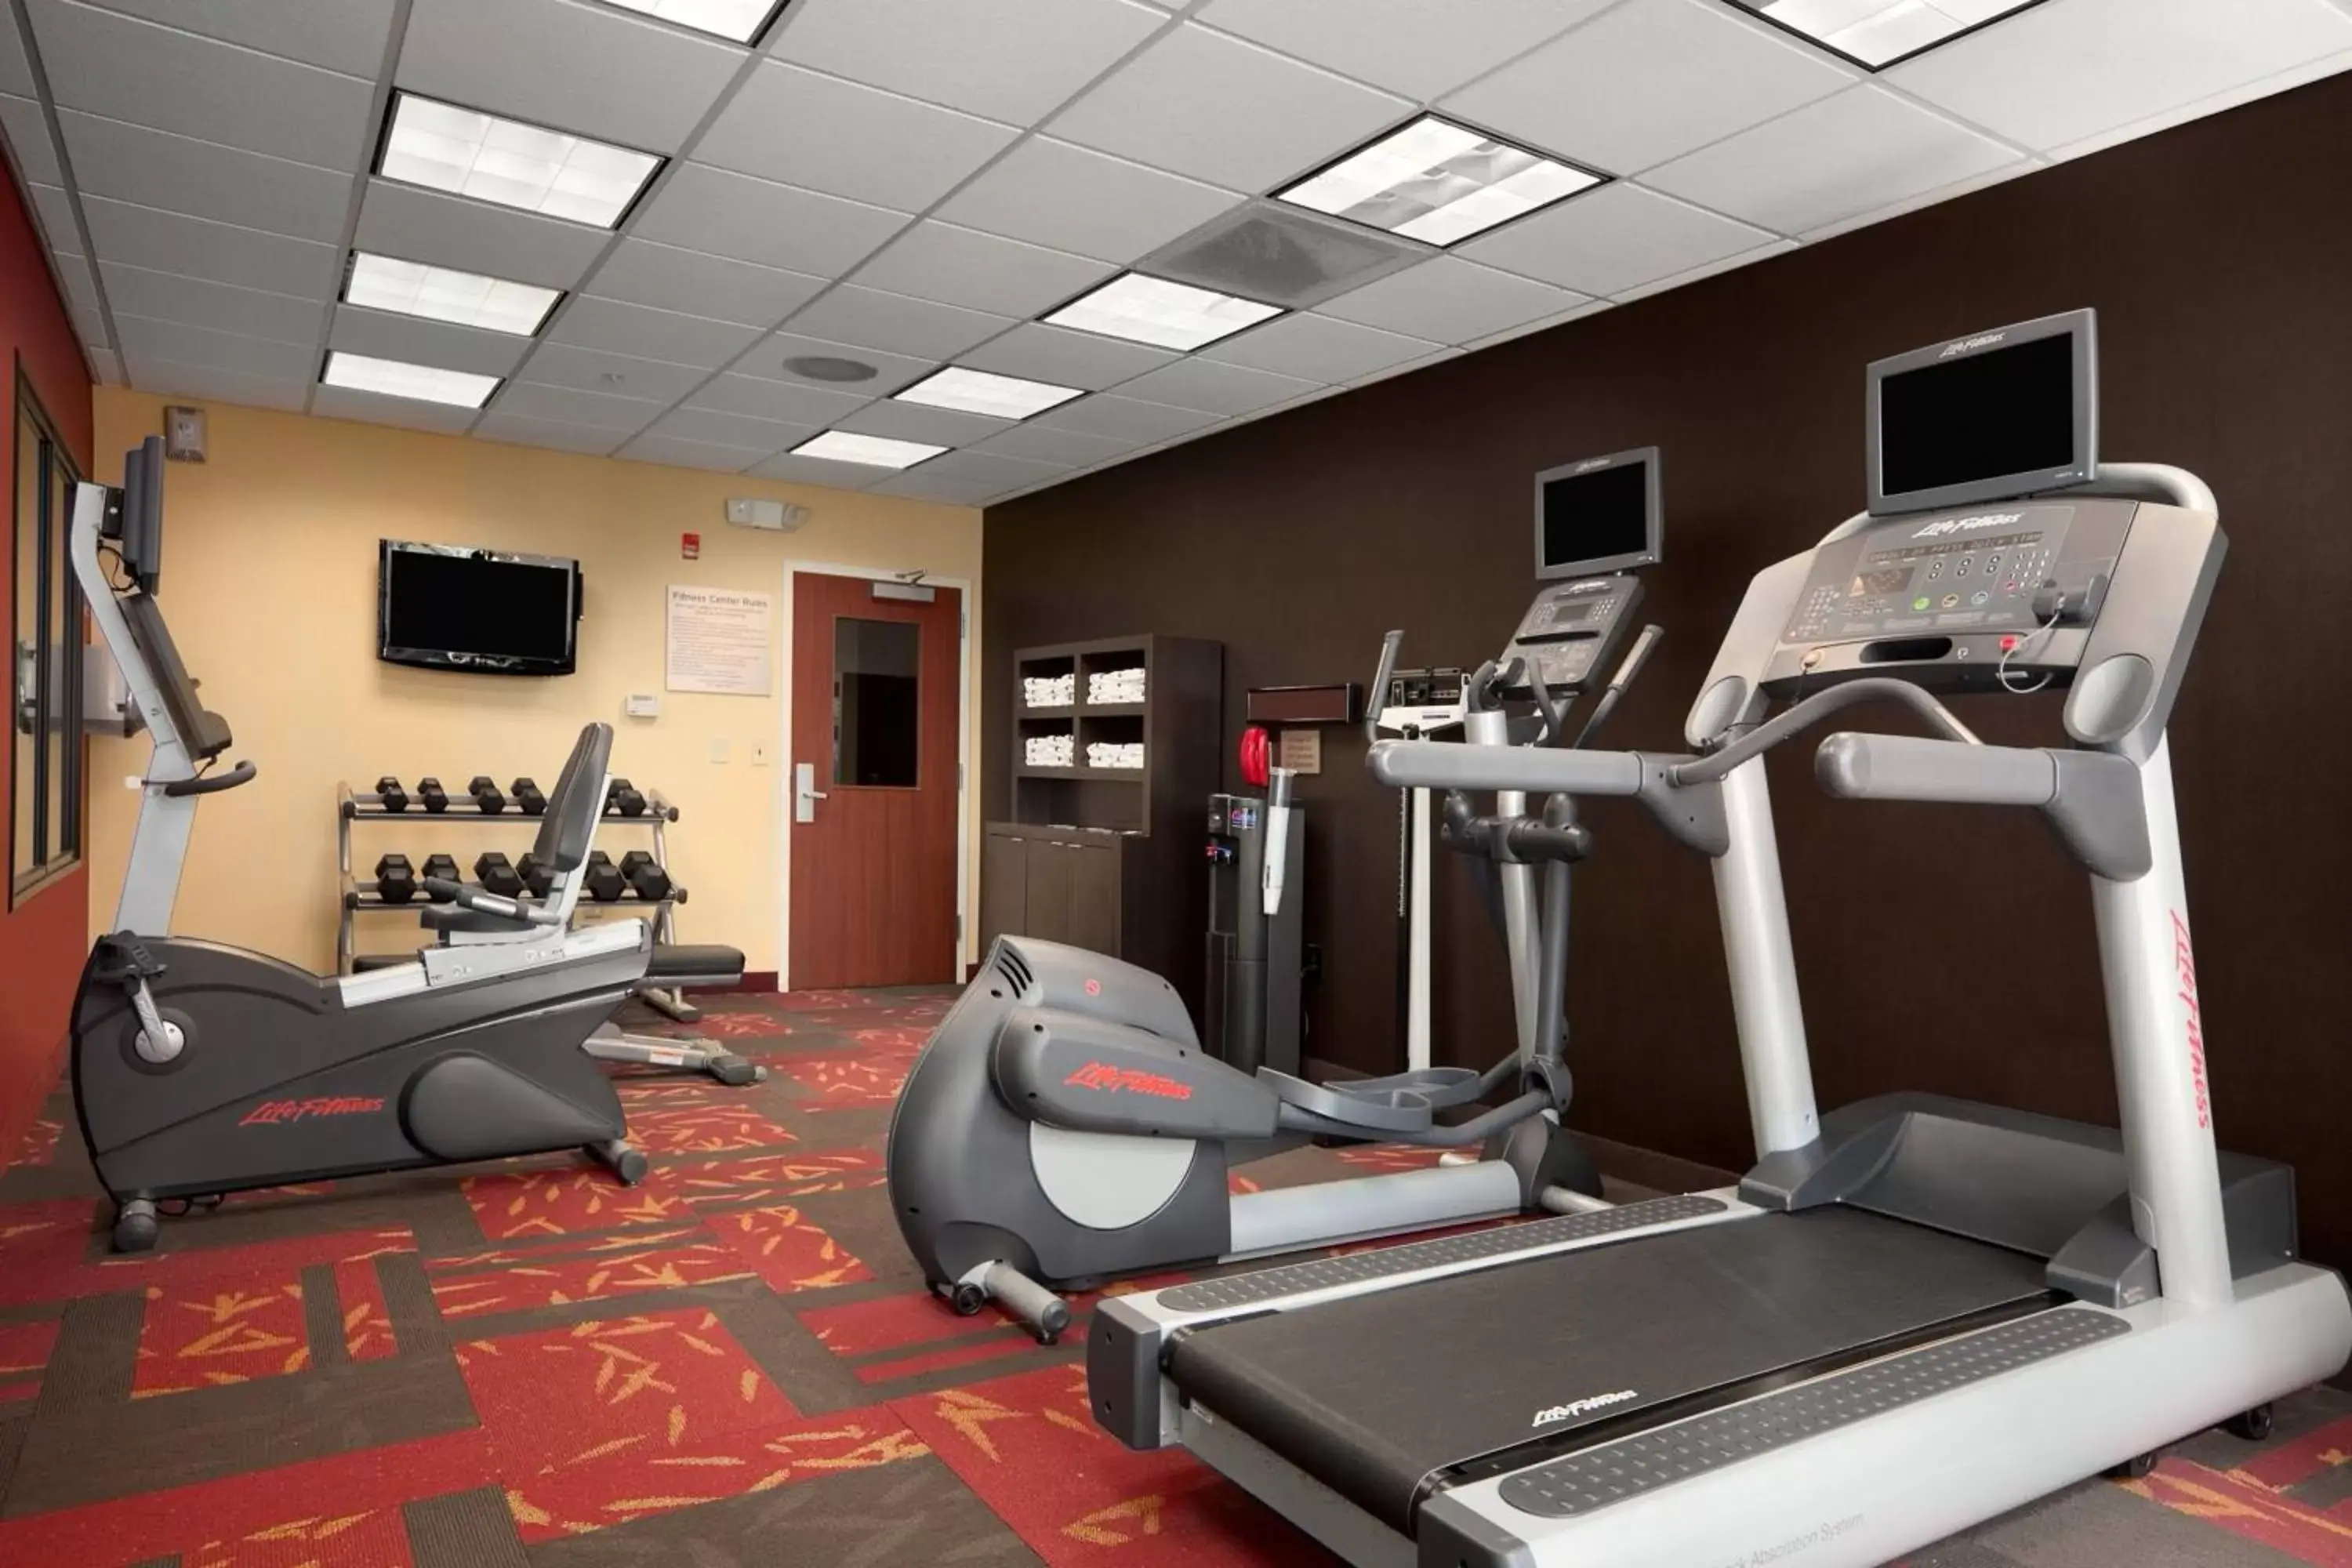 Fitness centre/facilities, Fitness Center/Facilities in Courtyard Wall at Monmouth Shores Corporate Park